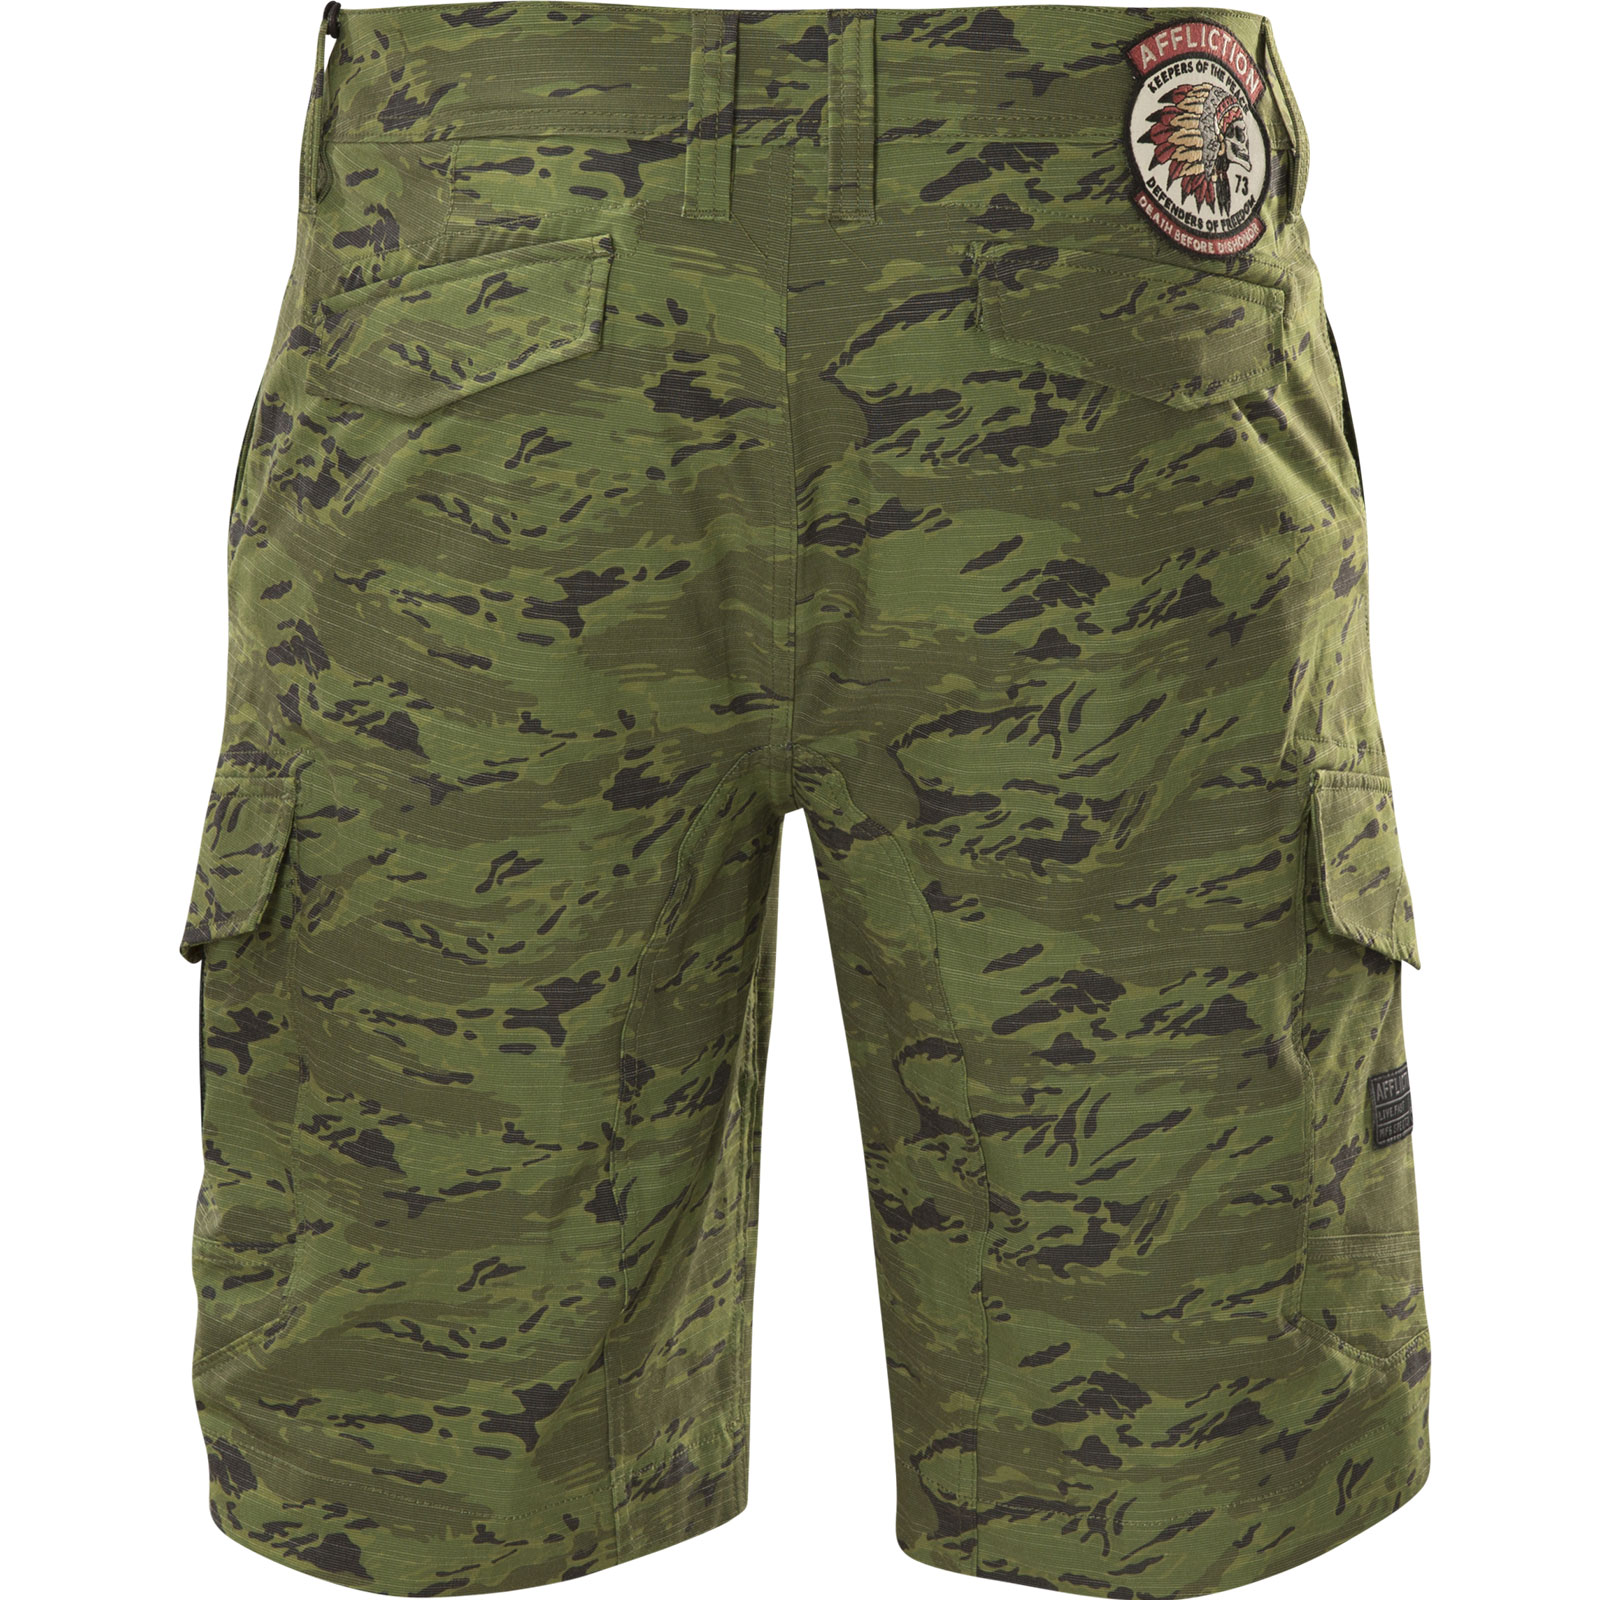 Affliction Stratton Shorts with lots of embroidering